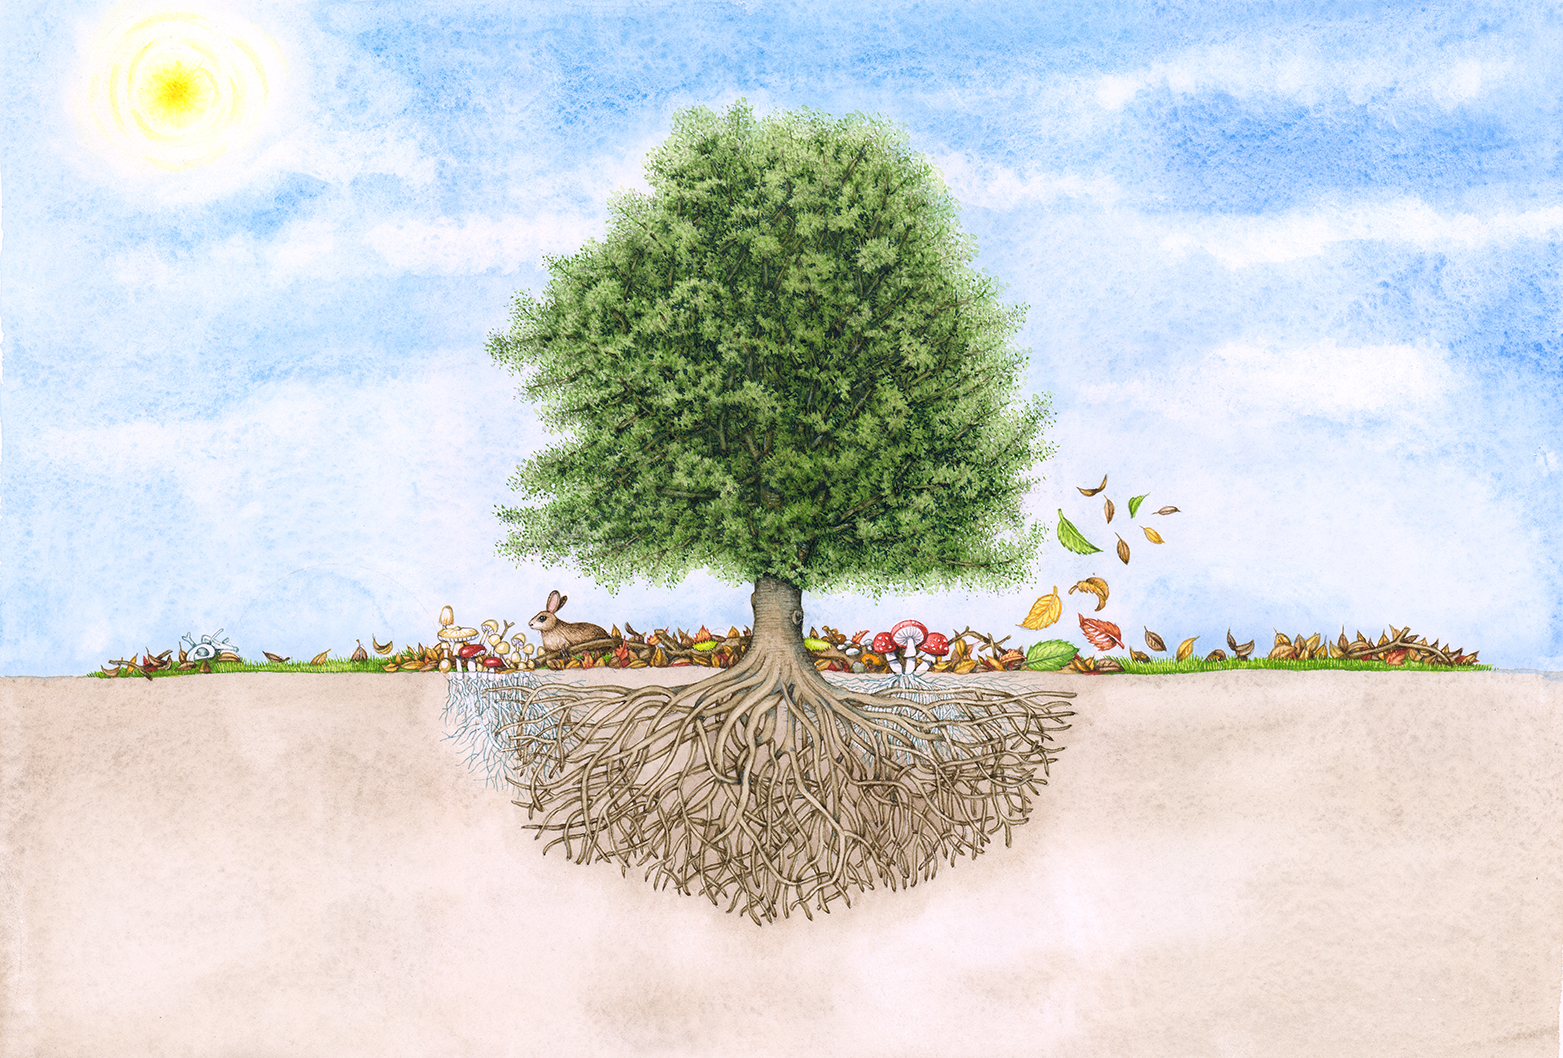 Free: Simple Tree Drawings With Roots Images Pictures Becuo - Tree Outline  With Roots - nohat.cc